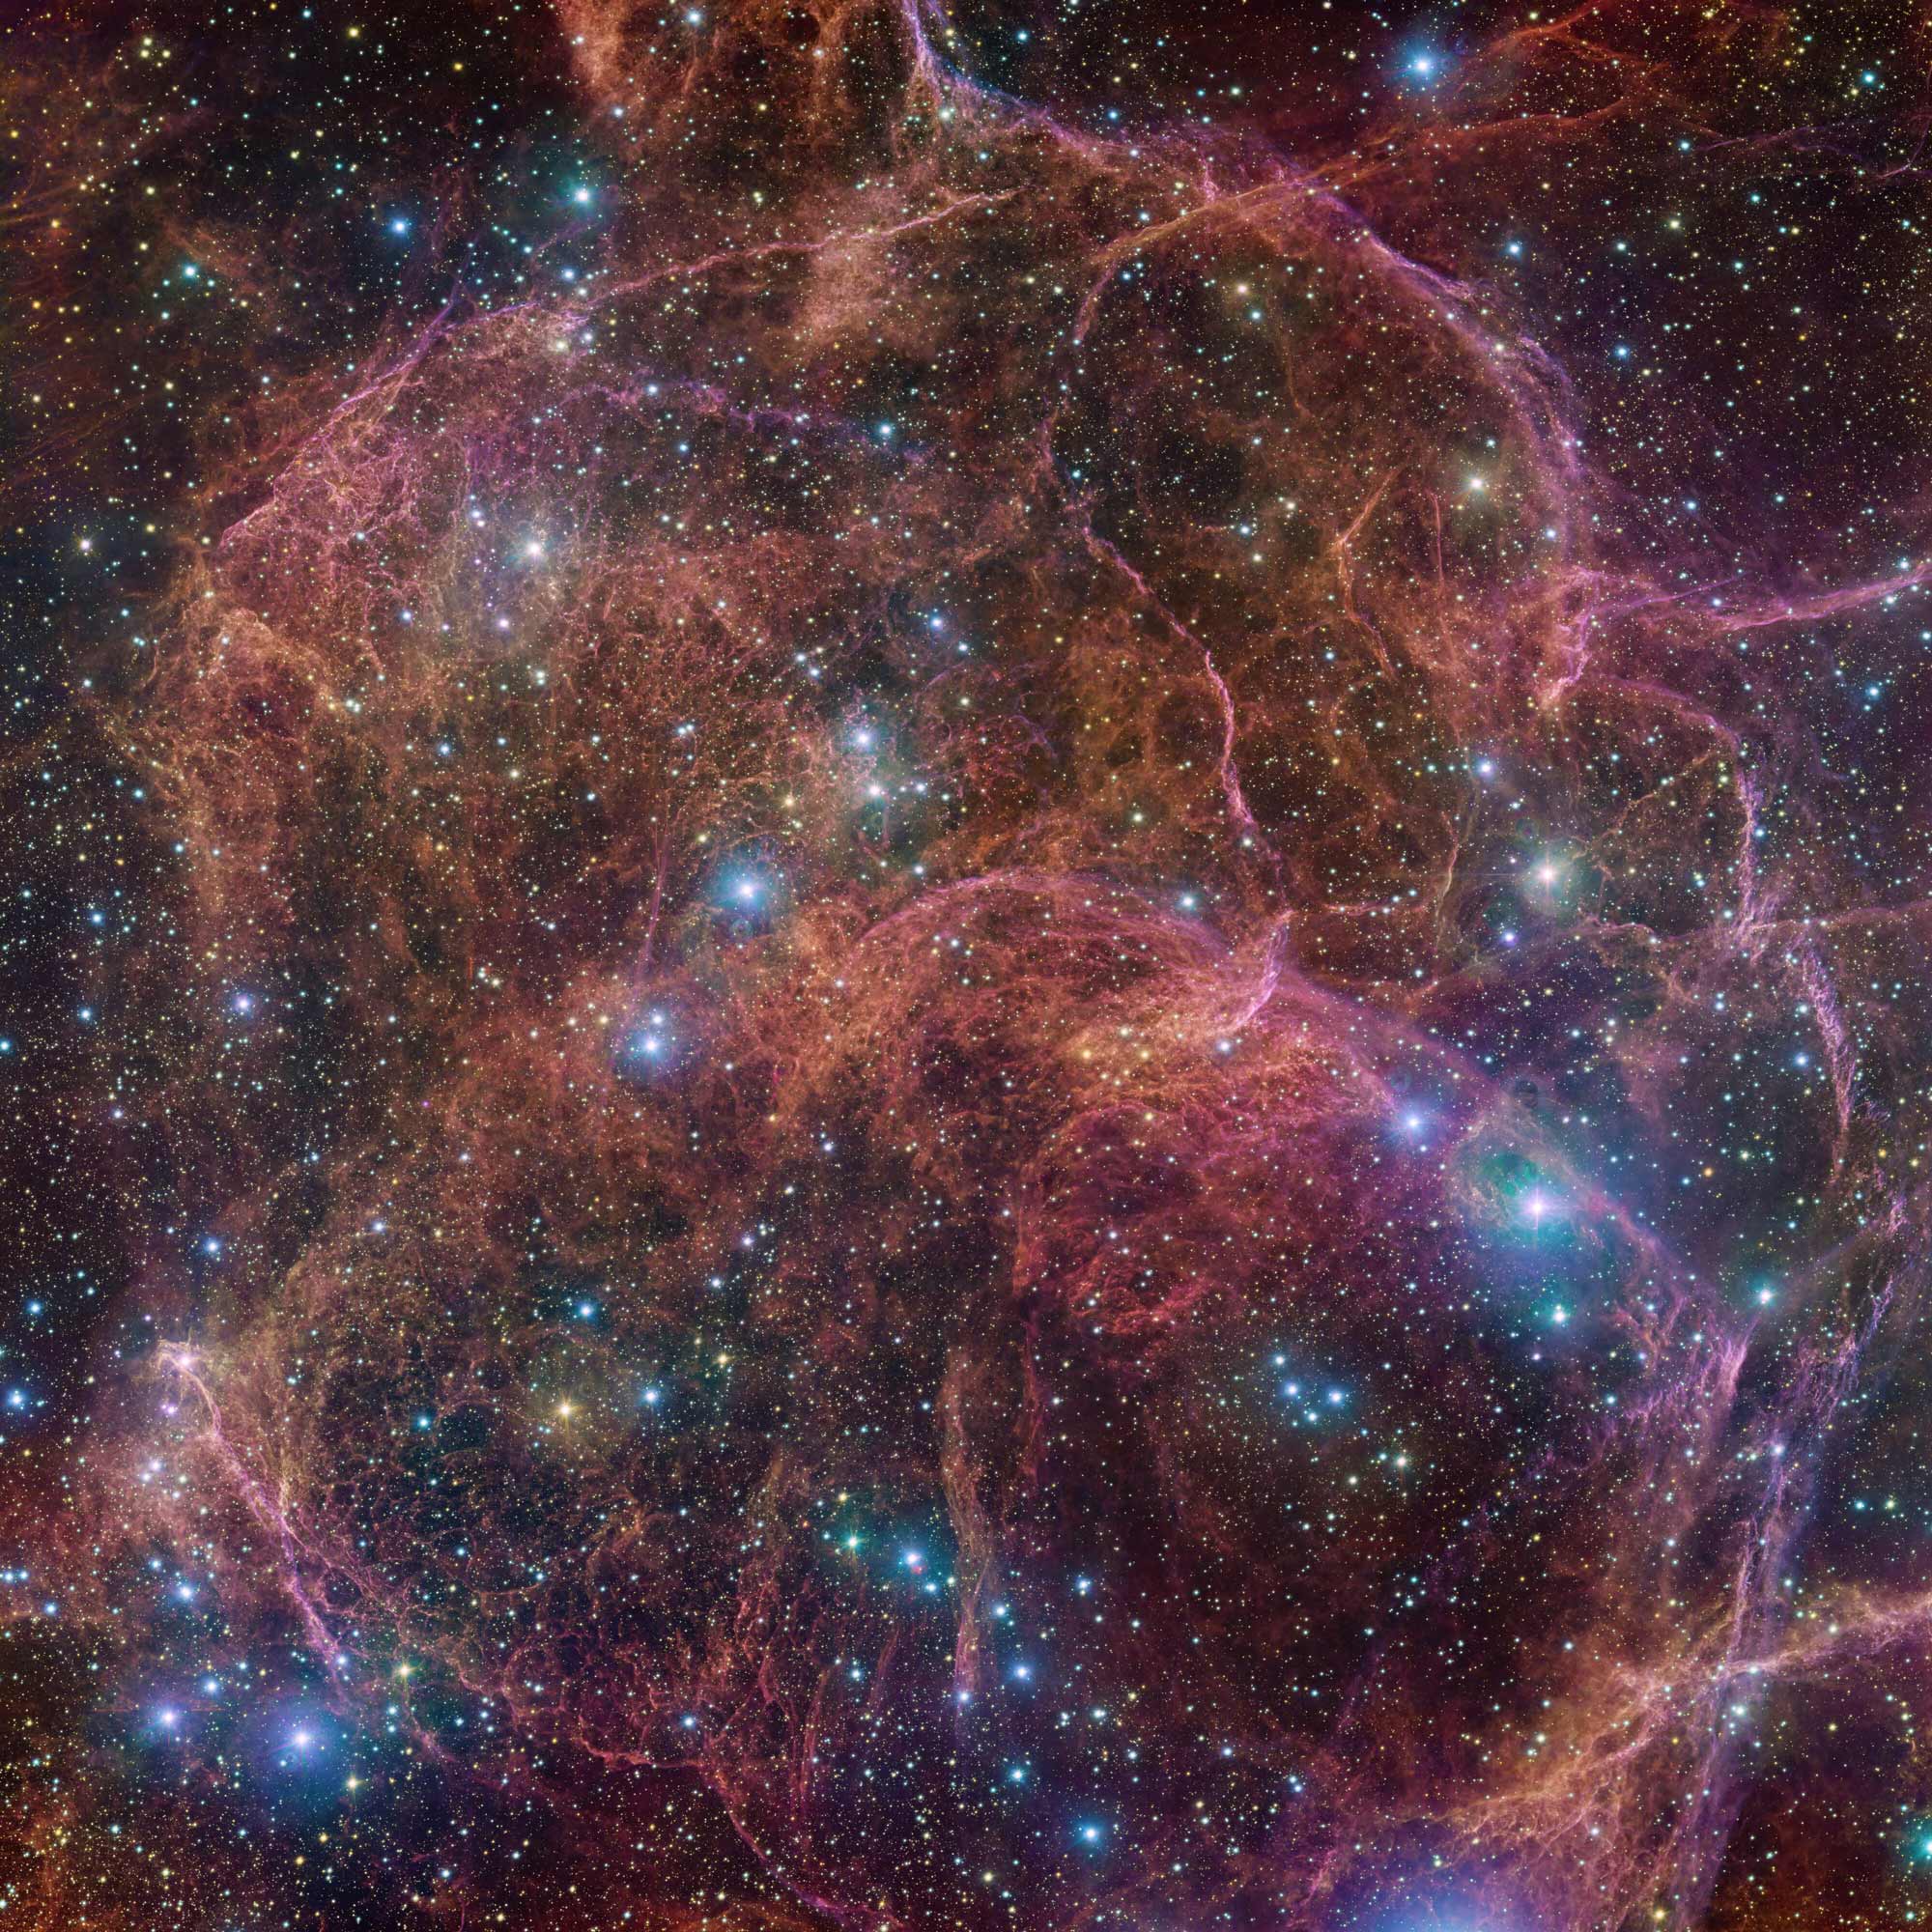 Orange and pink gas clouds make up the <a href="https://www.cnn.com/2022/10/31/world/ghost-star-supernova-scn/index.html" target="_blank">Vela supernova</a> remnant, all that remained after the explosive death of a massive star in this image released by the European Southern Observatory on October 31.